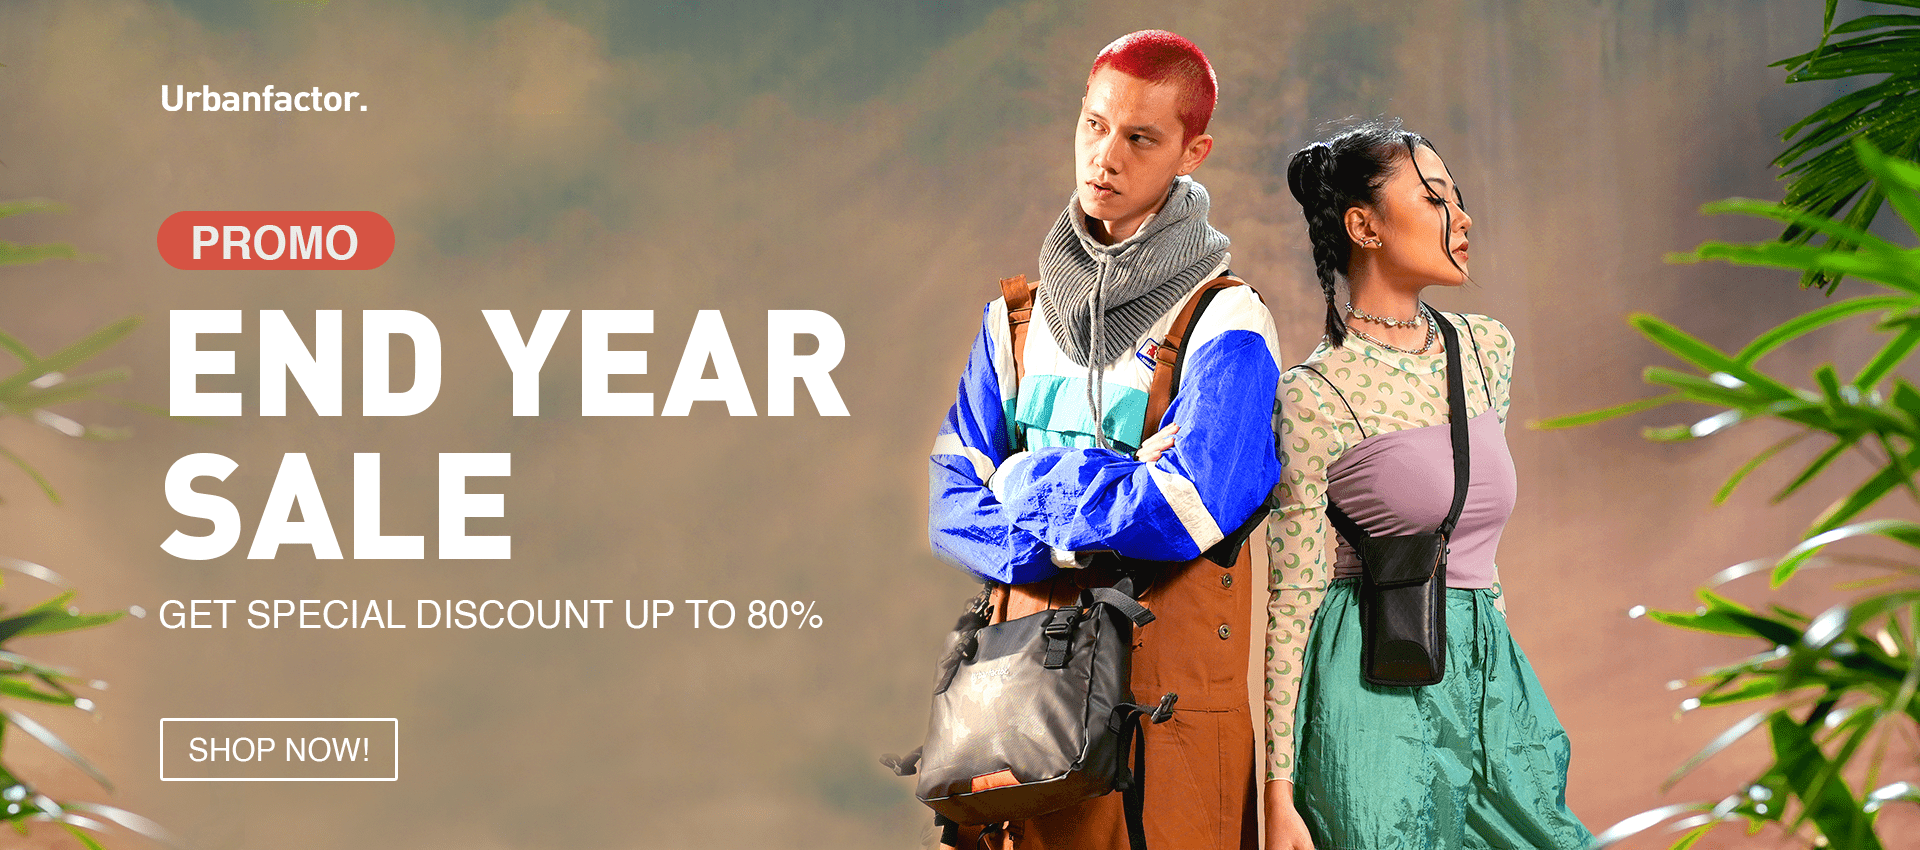 End Years Sale Urban Factor Up to 80%